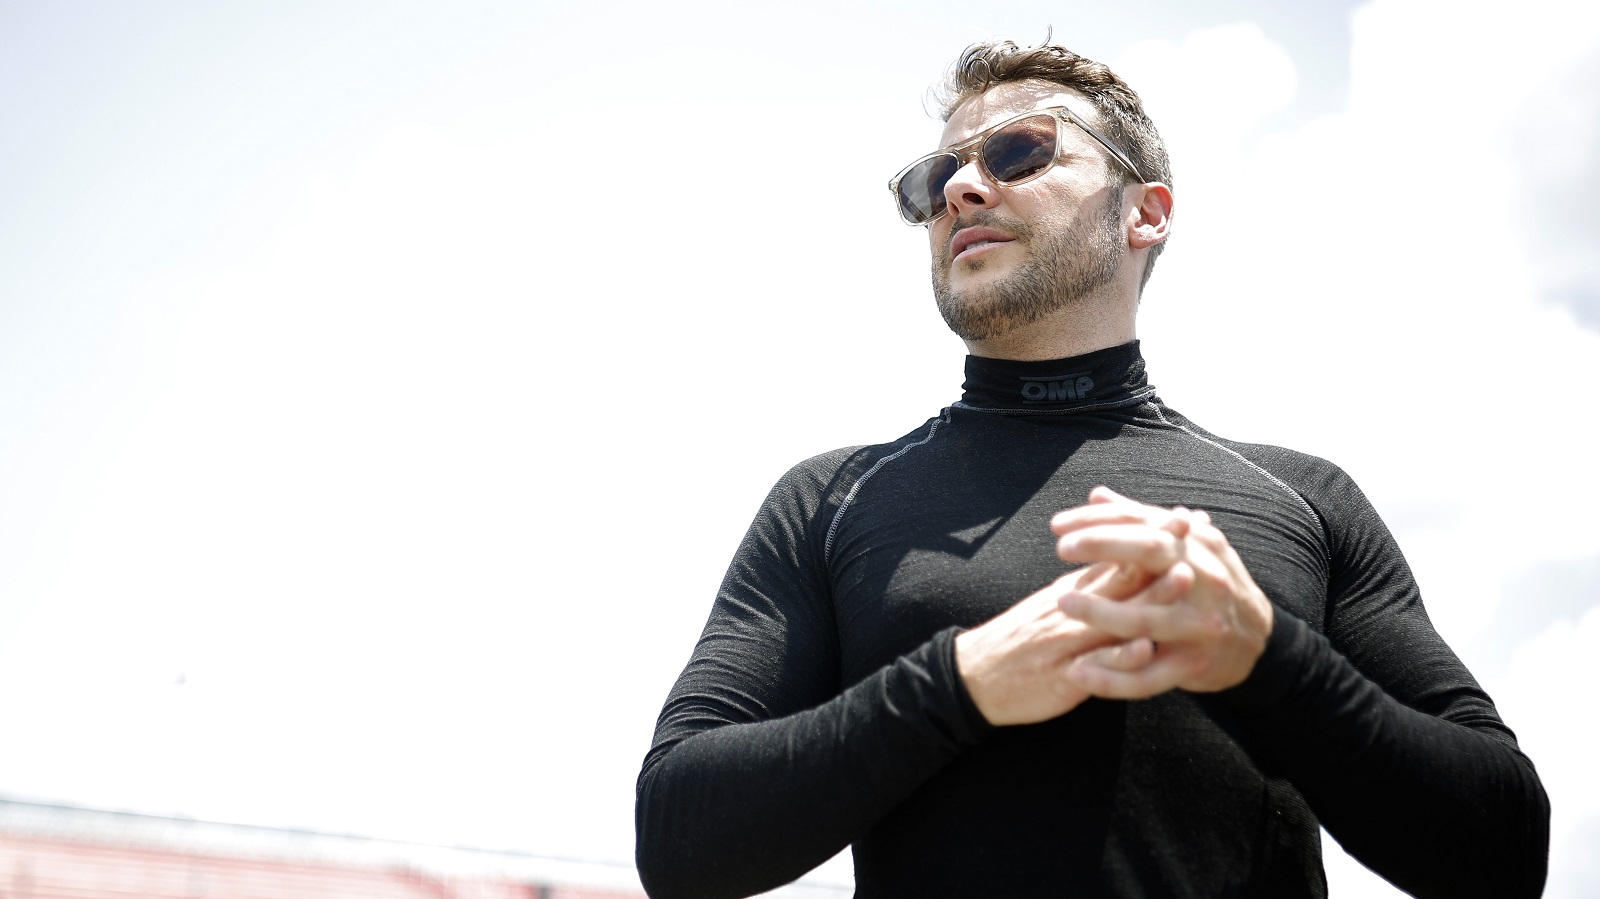 Marco Andretti Will Make His NASCAR Debut by Teaming up With a Music Mogul